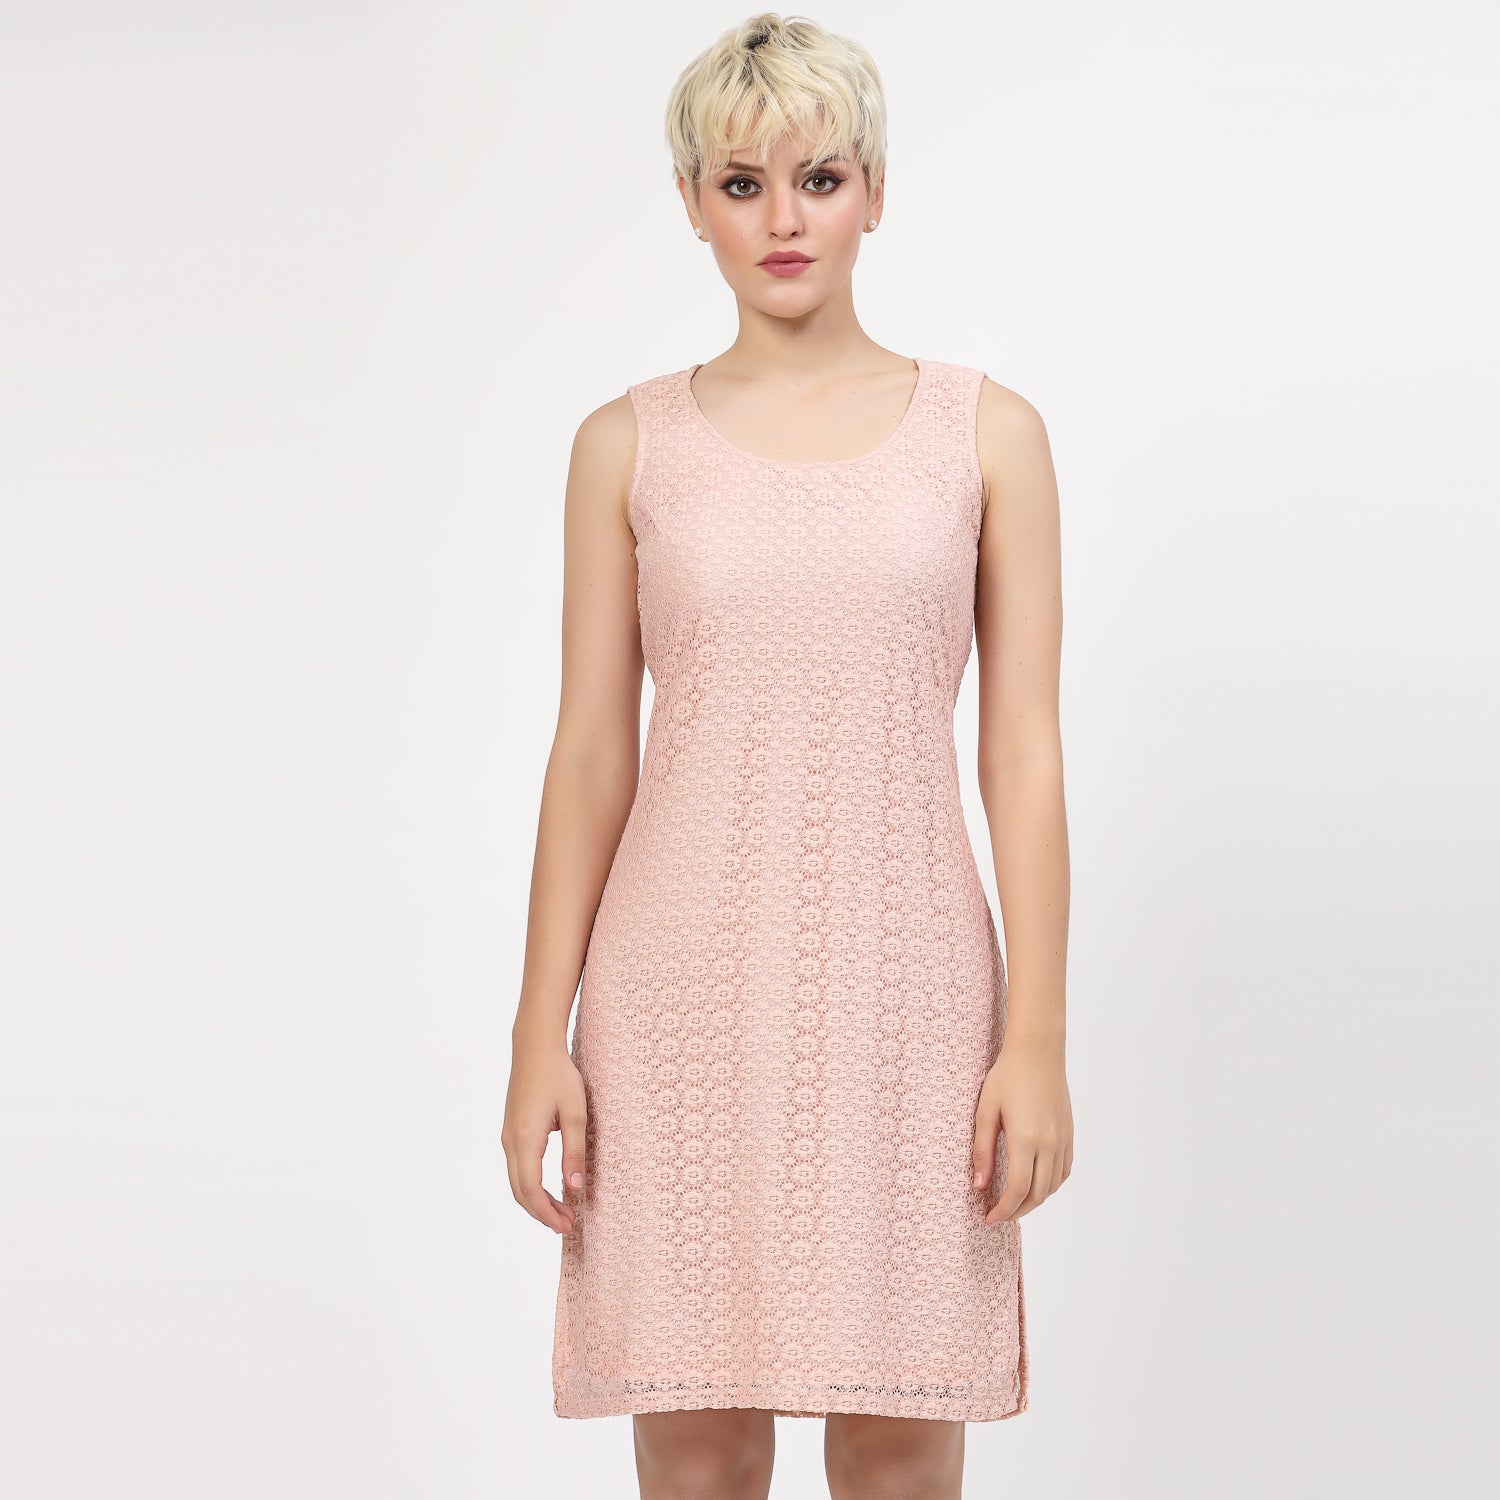 Peach Flower Net Without Sleeves Dress